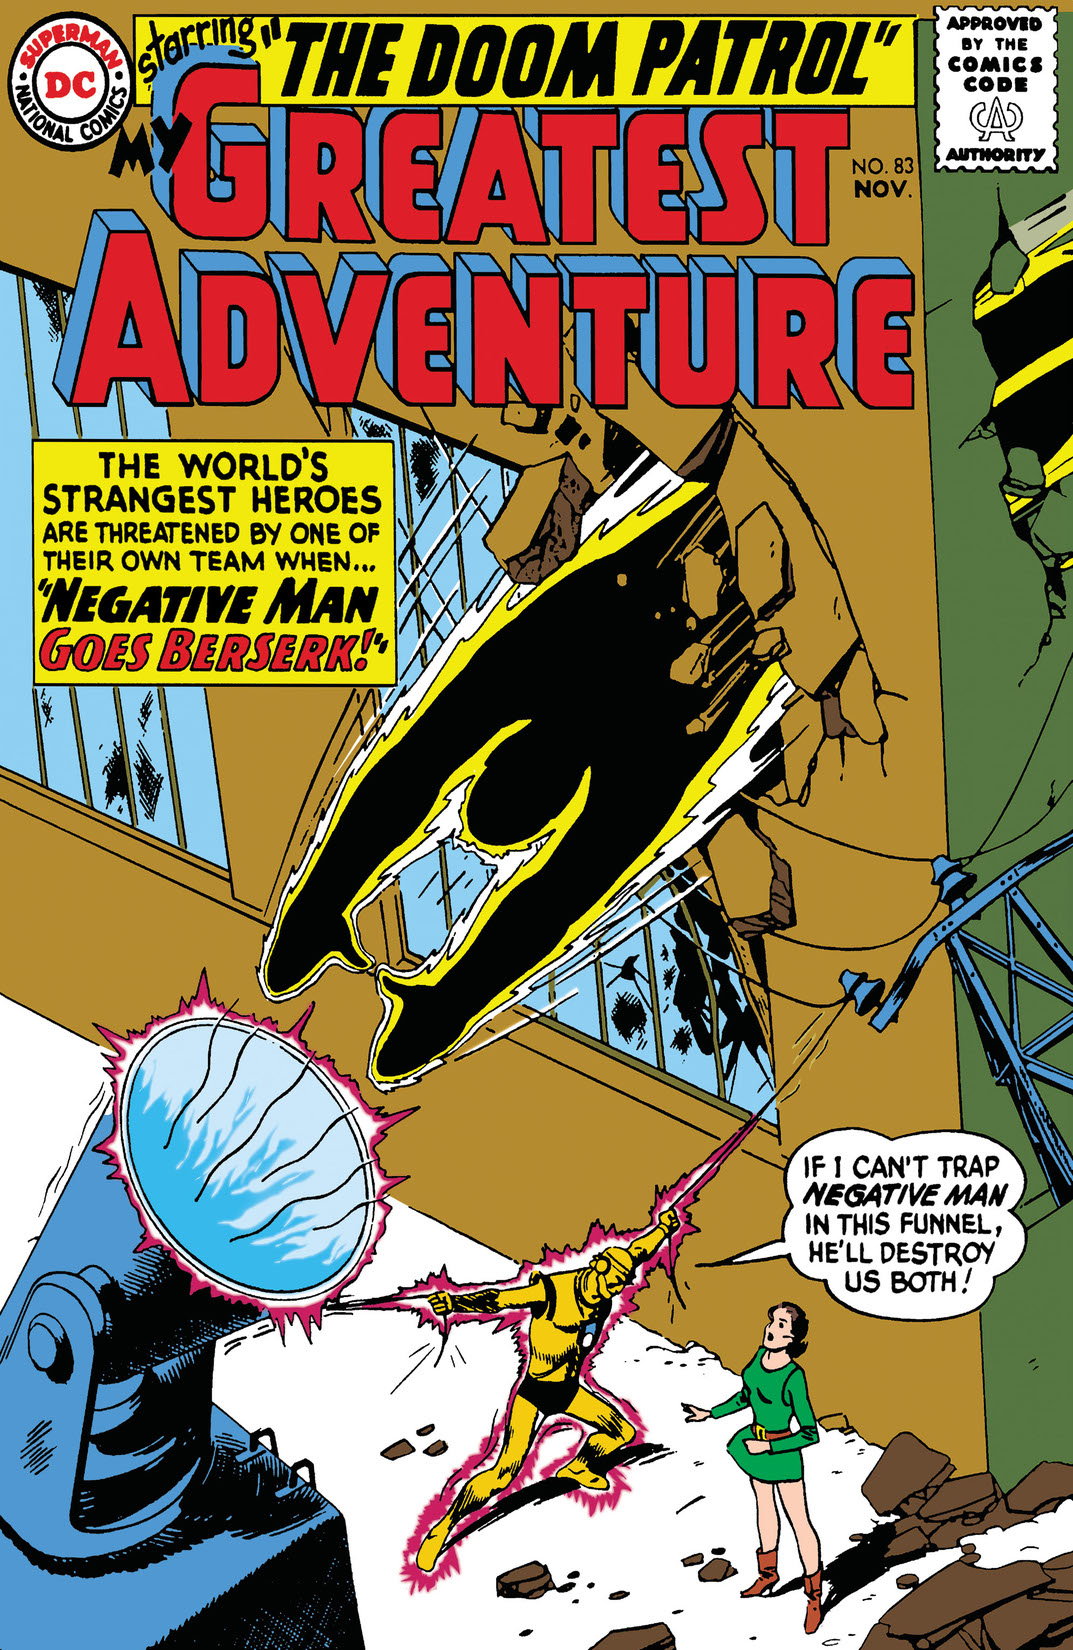 My Greatest Adventure (1955-) #83 preview images